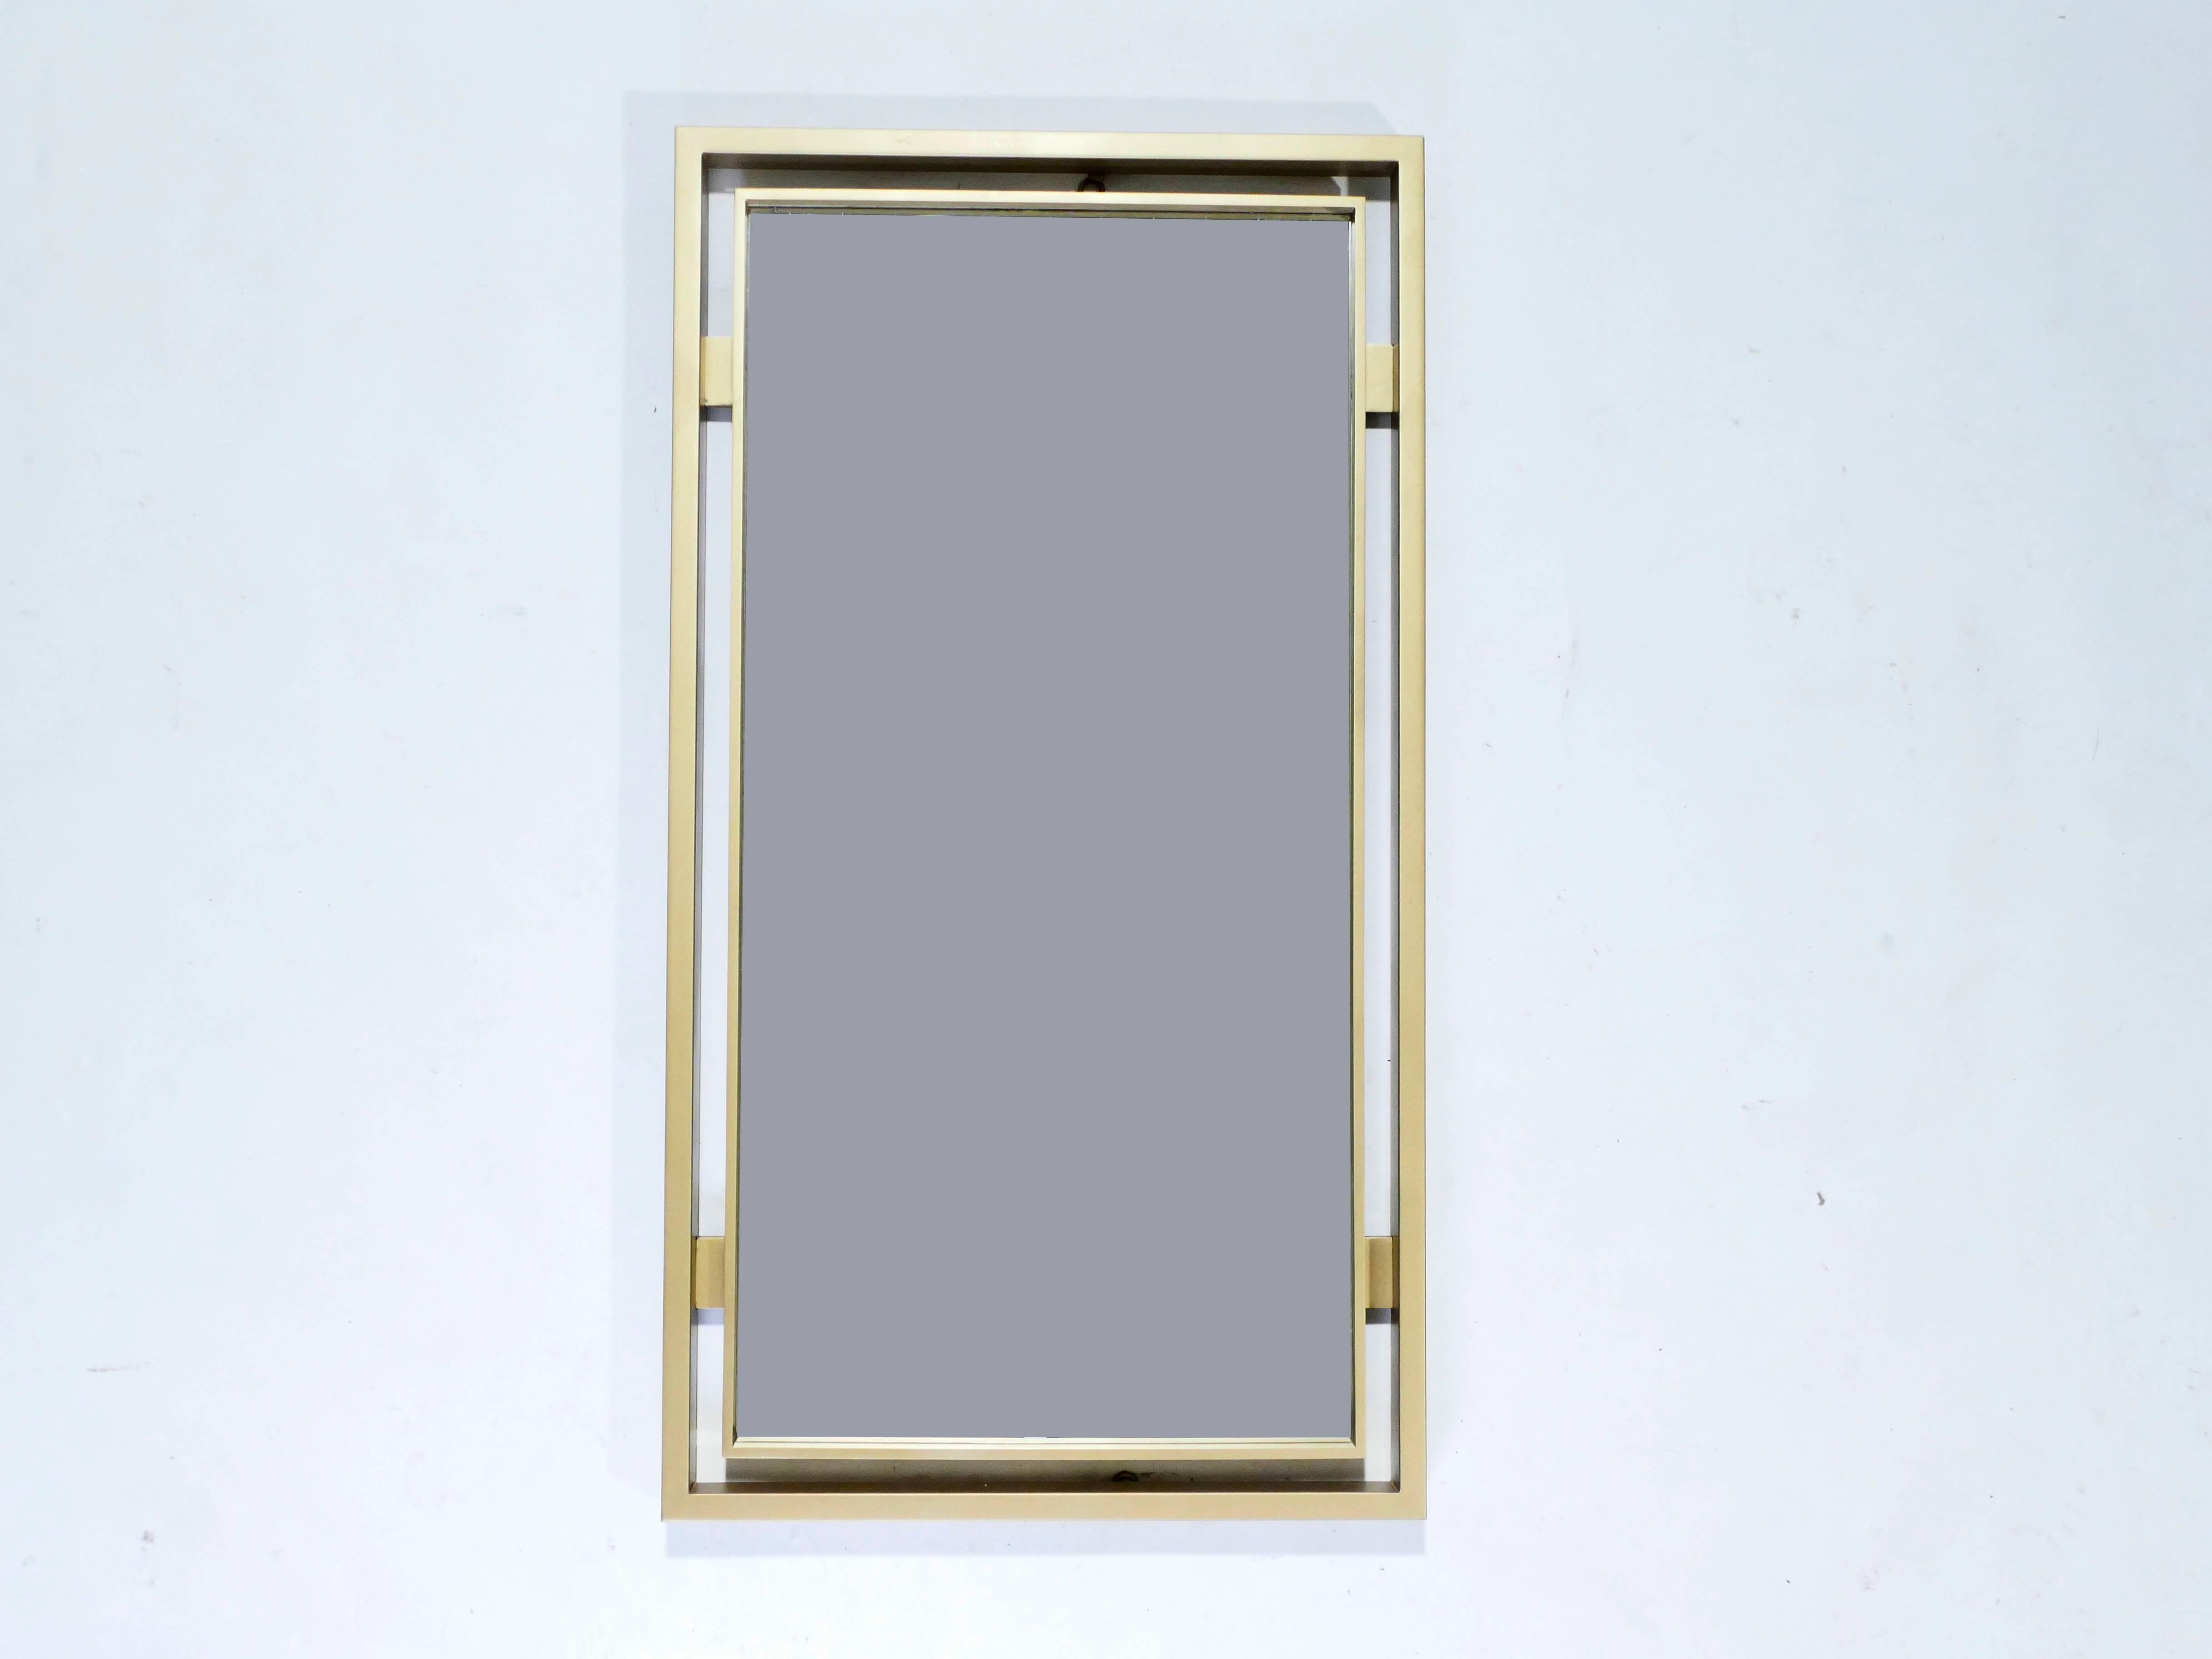 With its strong geometric design, this statement mirror is typical of French designer Guy Lefevre’s work for Maison Jansen. Its imposing mat brass border surrounds the mirror, creating a chic, timeless piece. Found in very good vintage condition and